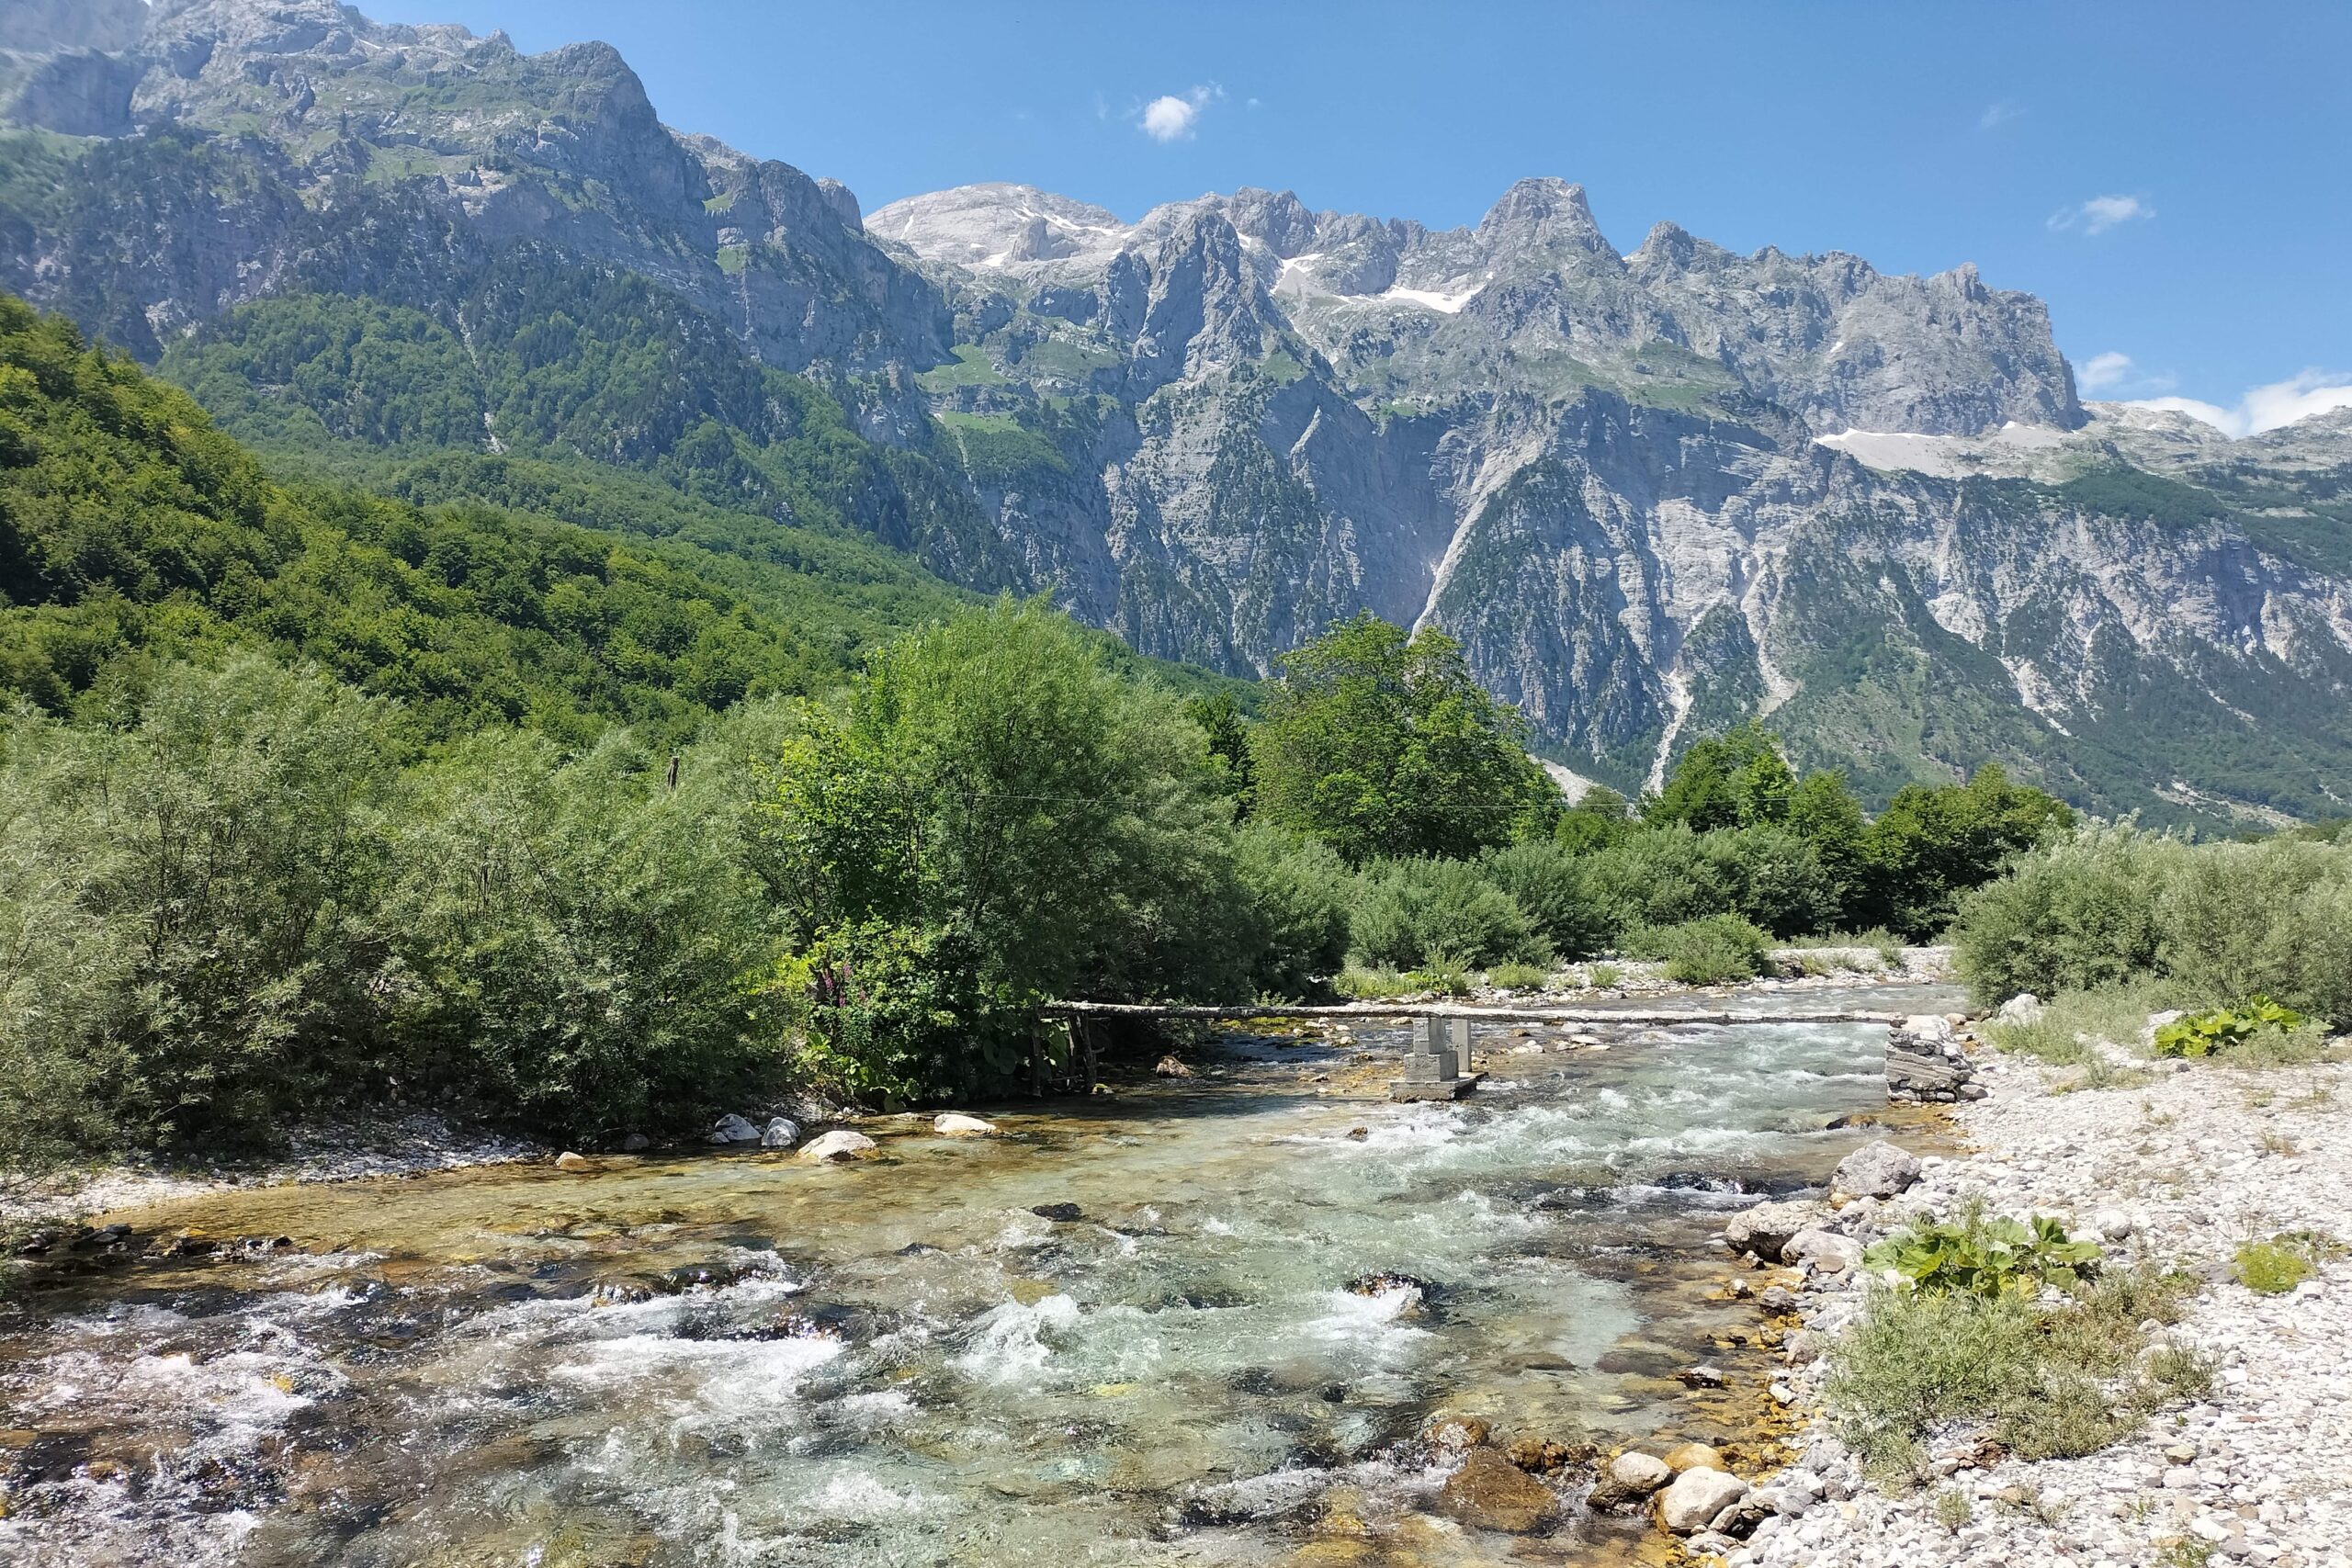 The Complete Guide to Hiking the Albanian Alps